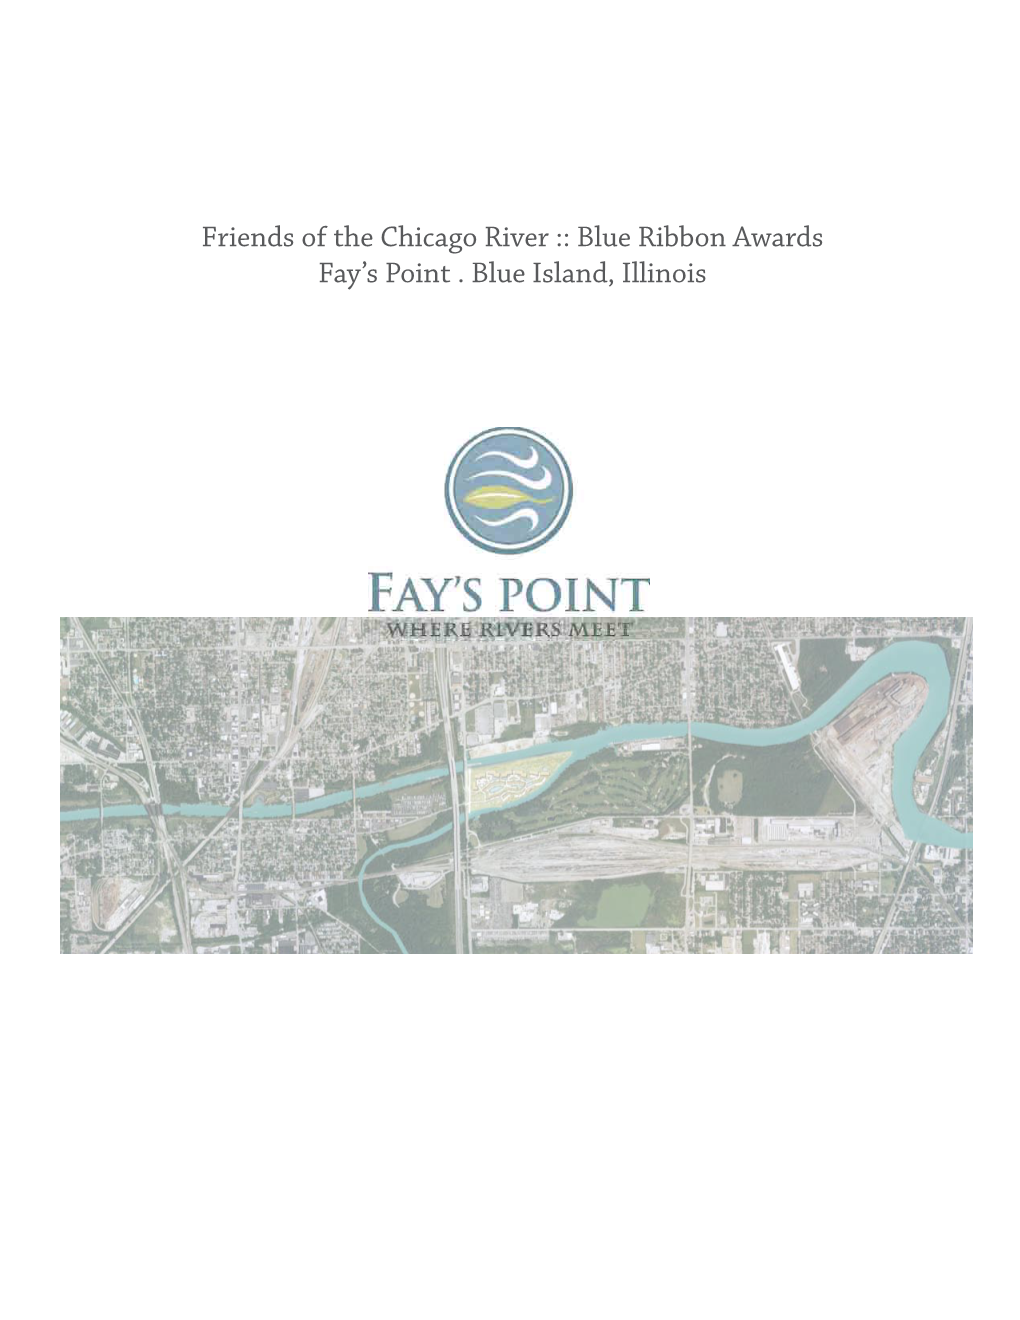 Friends of the Chicago River :: Blue Ribbon Awards Fay's Point . Blue Island, Illinois